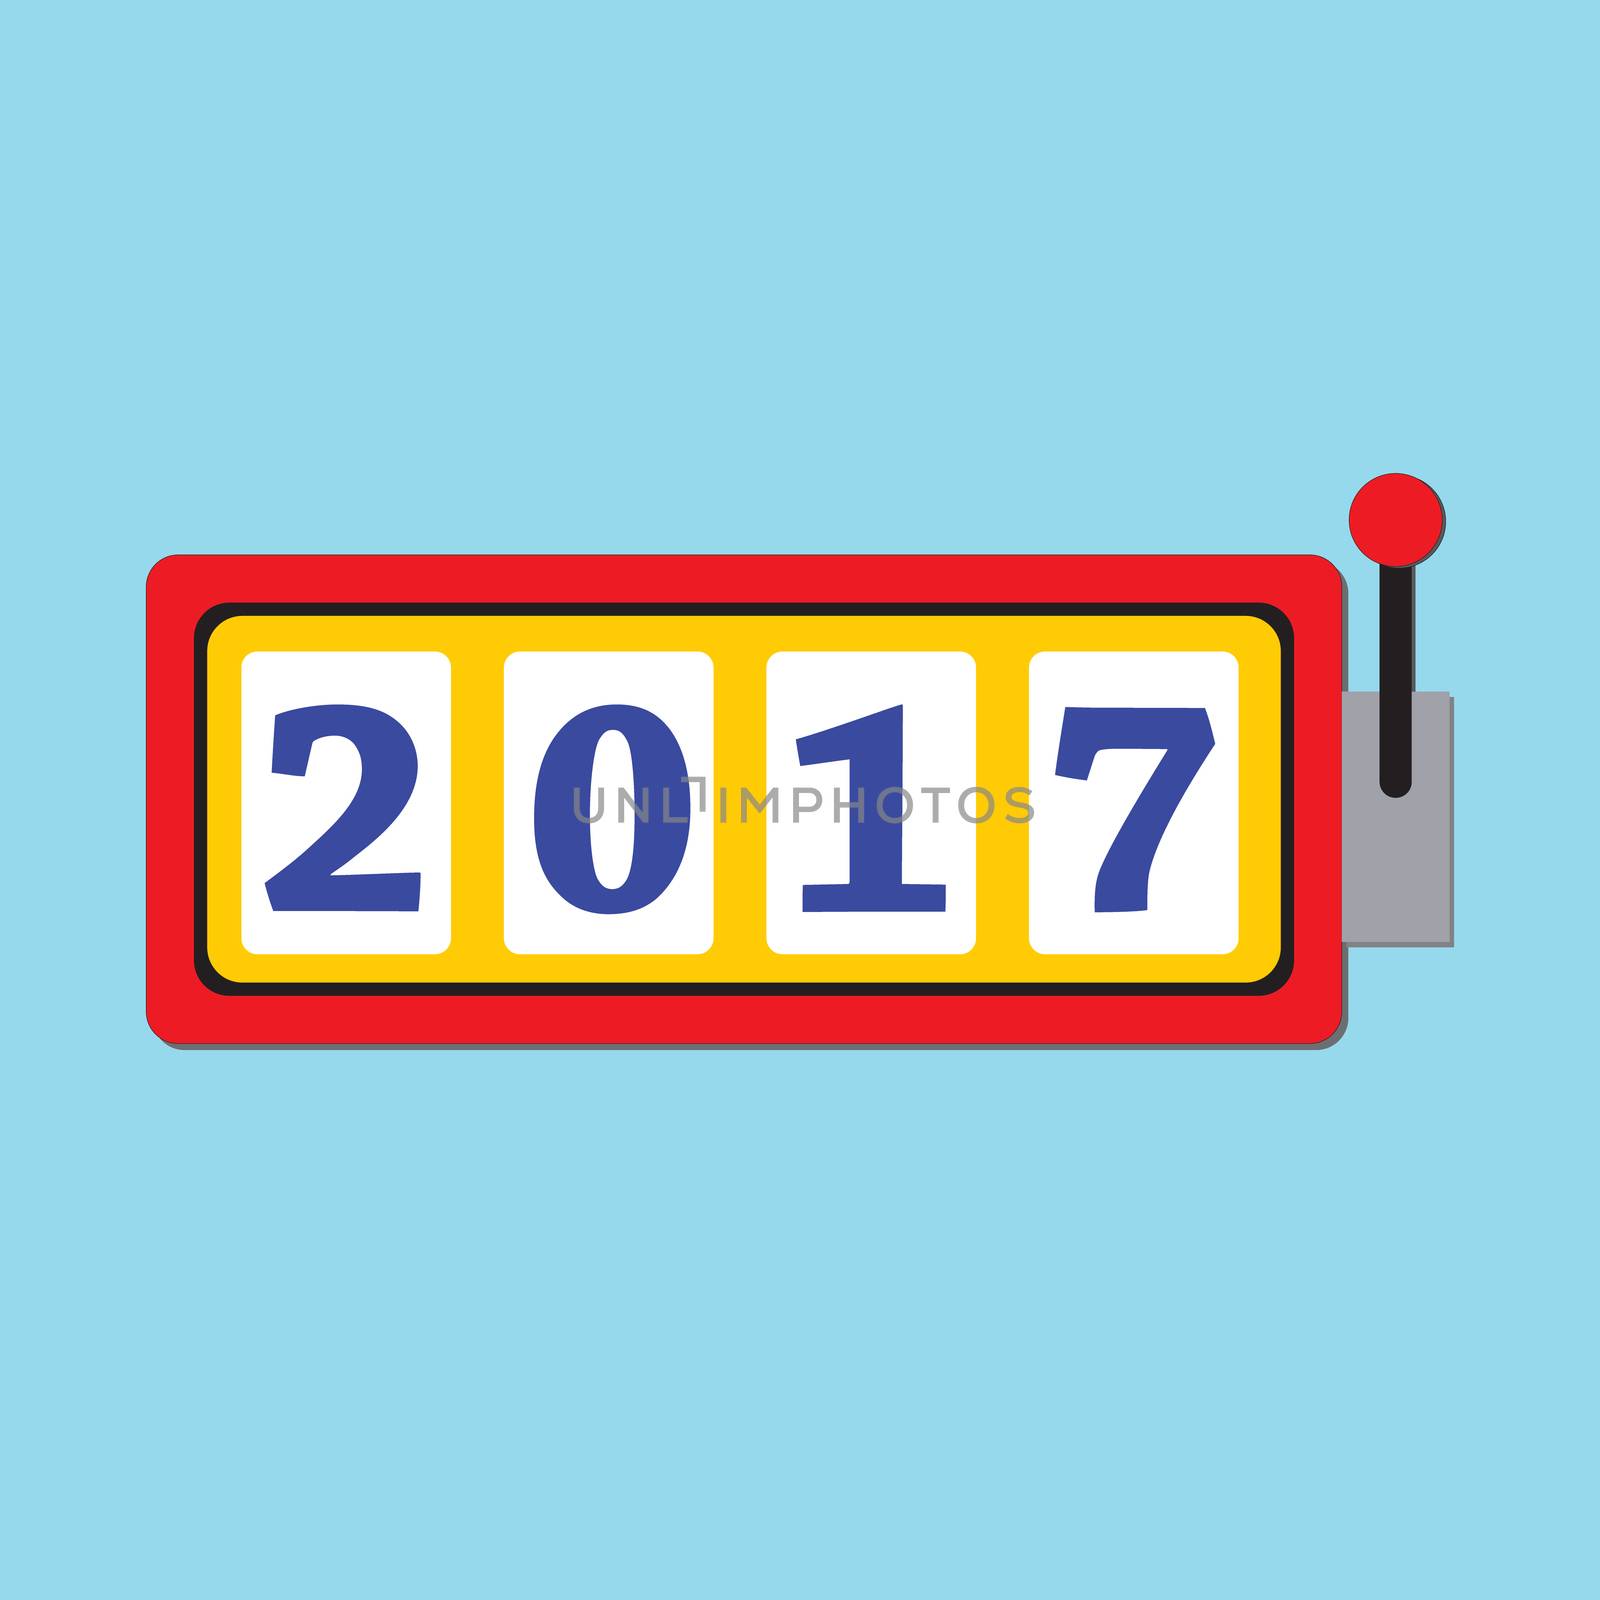 Happy New Year 2017 greeting card with slot machine and lucky 2017 figures.